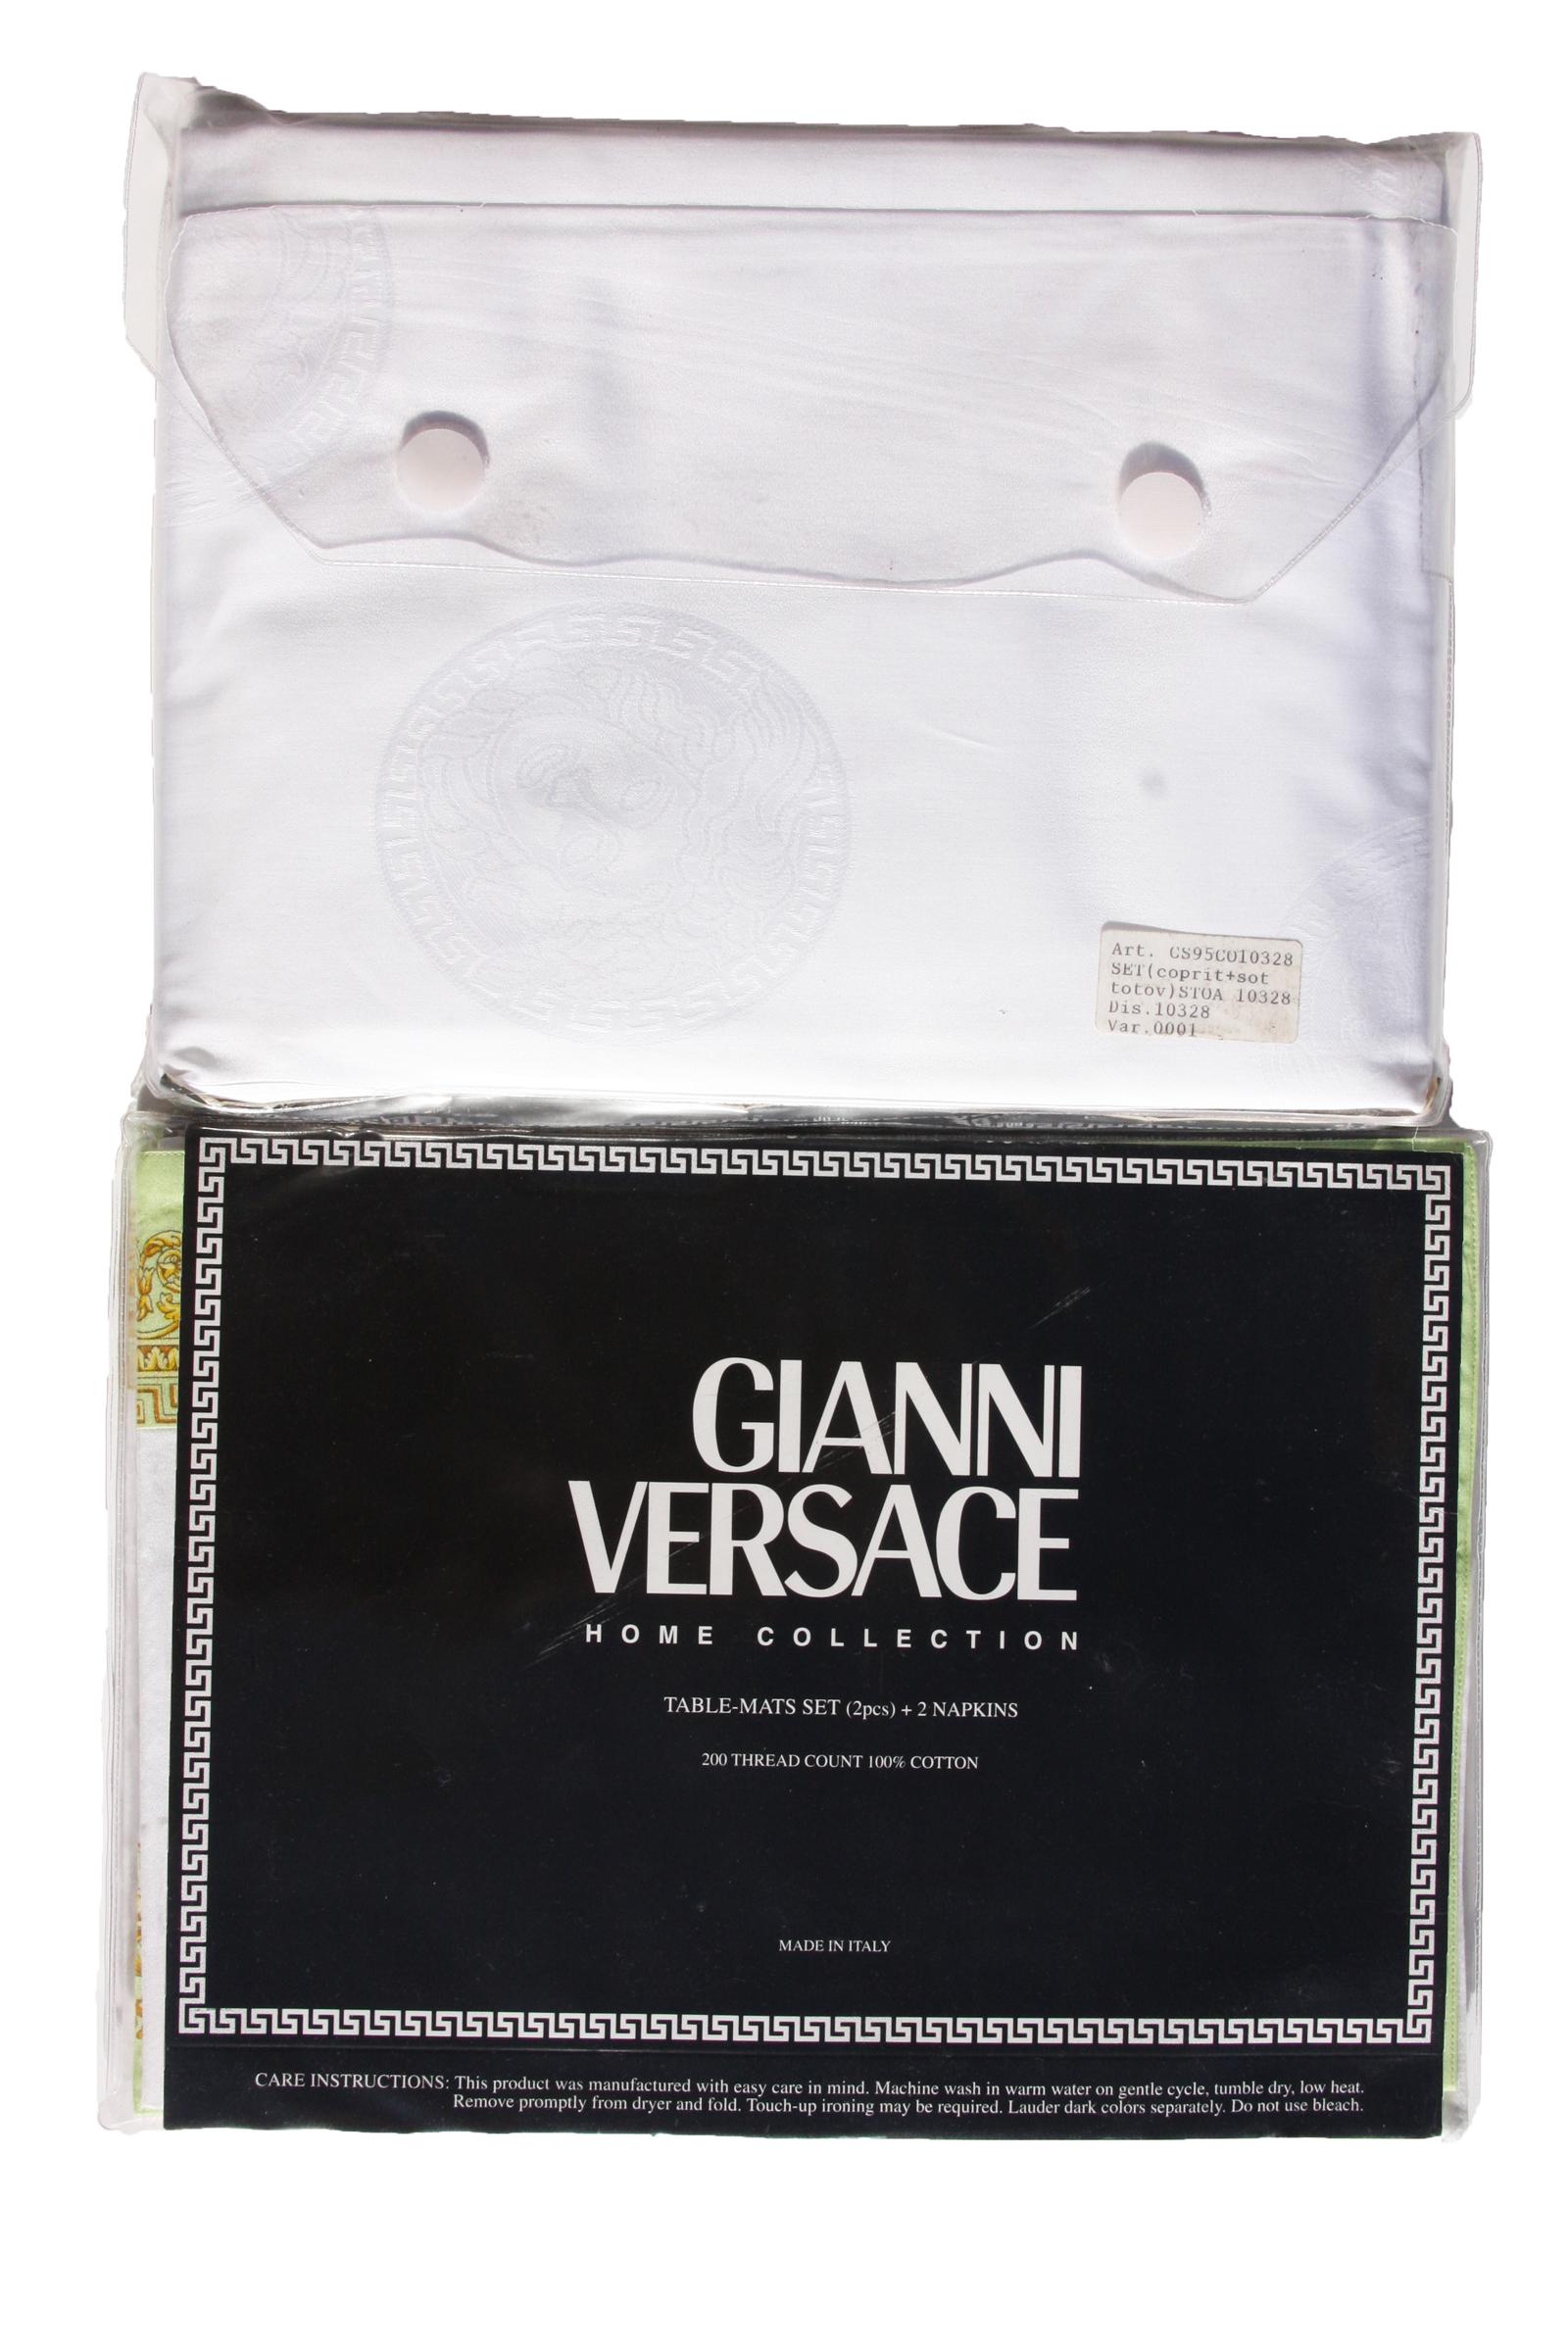 New and Rare Gianni Versace Home Collection Medusa Print 10 pc Table Set
Colors: Soft Green, Soft Brown and Yellow, 100% Cotton, 200 Thread Count
Table Set Includes:
1 Table Cloth Square - 55 x 55 inches (140 x 140 cm) - with Design Around 
1 Under